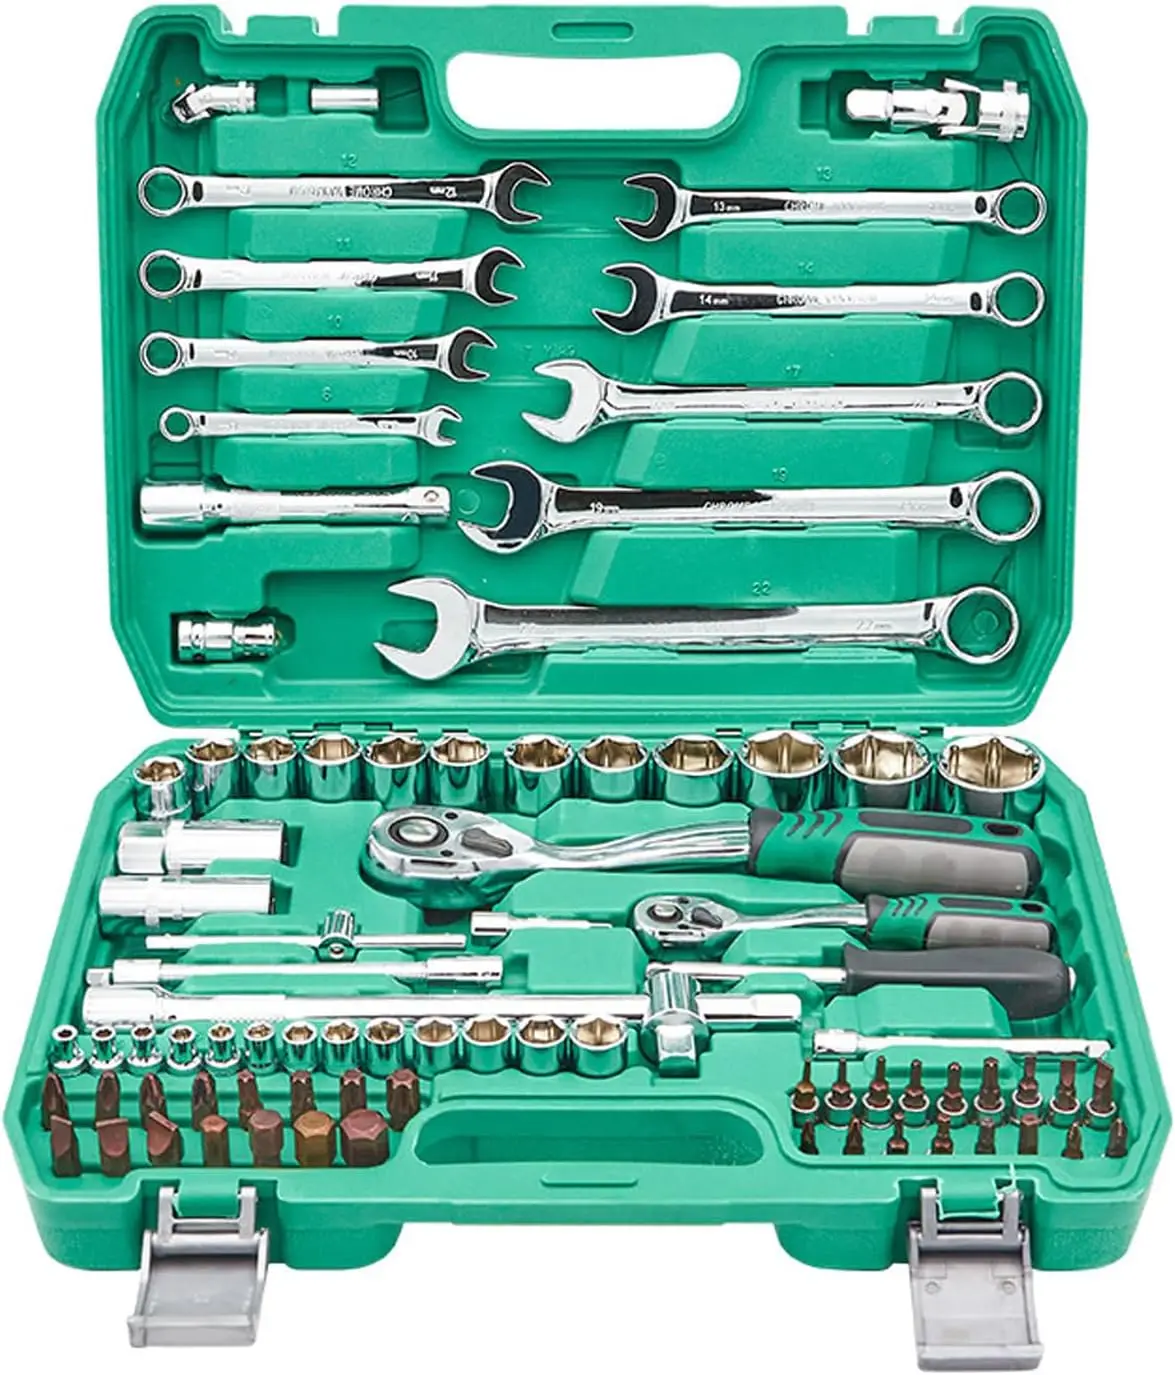 

Socket Ratchet Wrench Set with Bit Socket Set, 72 Tooth Ratchet Wrench Handle Hand Tools Electric Car Conversion Kit